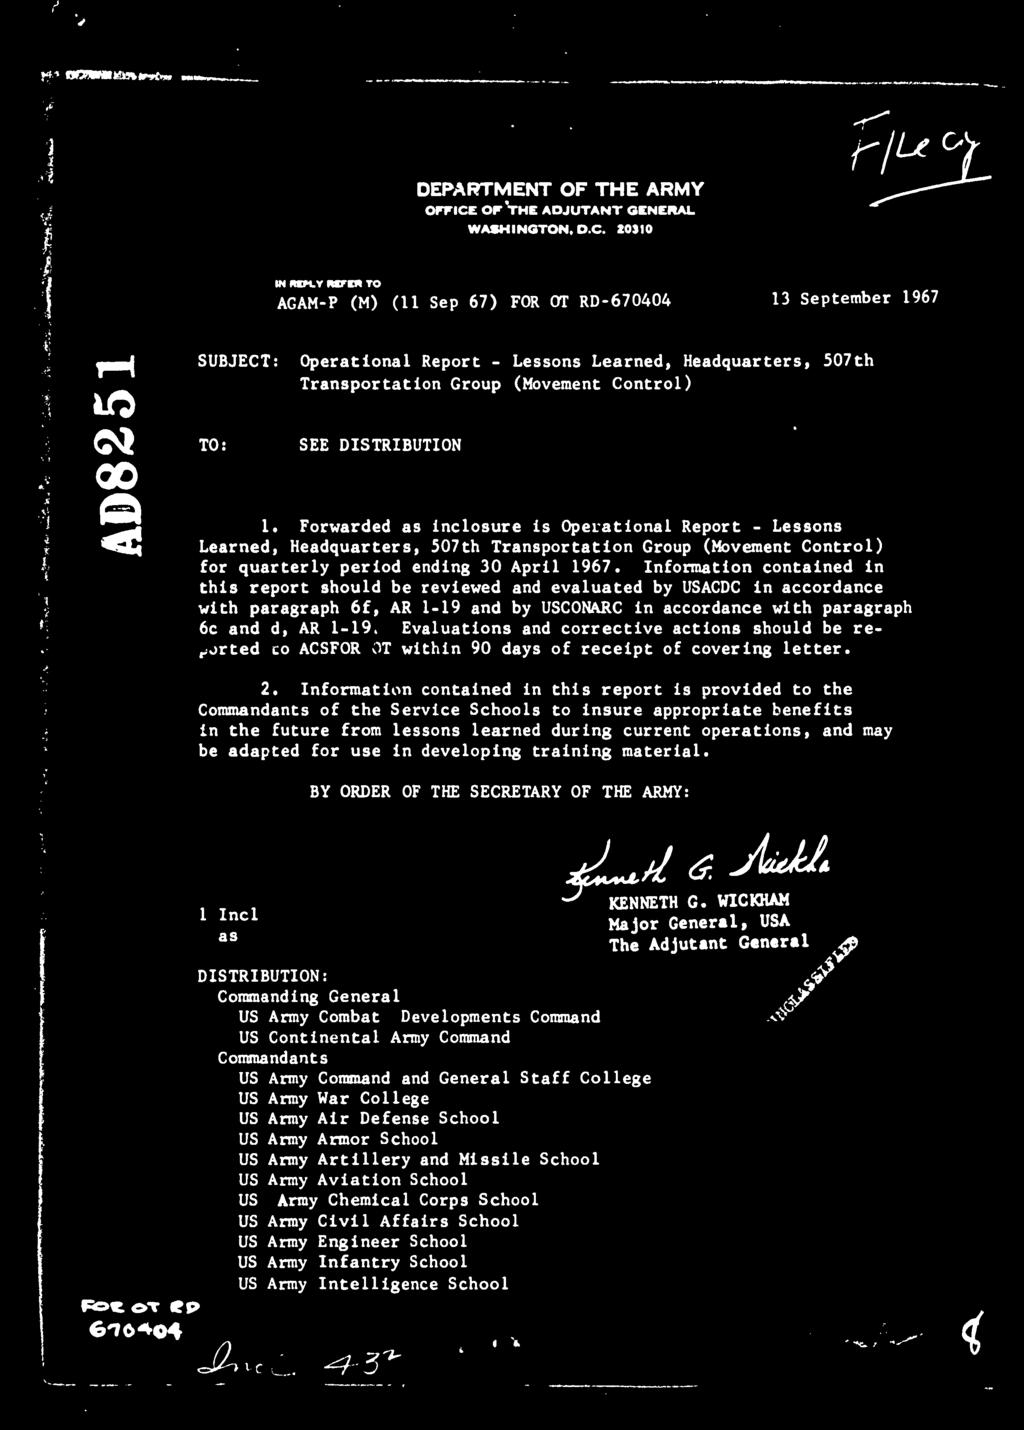 20910 rl u^\ TO AGAM-P (M) (11 Sep 67) FOR 0T RD-670404 13 September 1967 T-l 40 G* TO: 00 SUBJECT Operational Report - Lessons Learned, Headquarters, 507th Transportation Group (Movement Control)